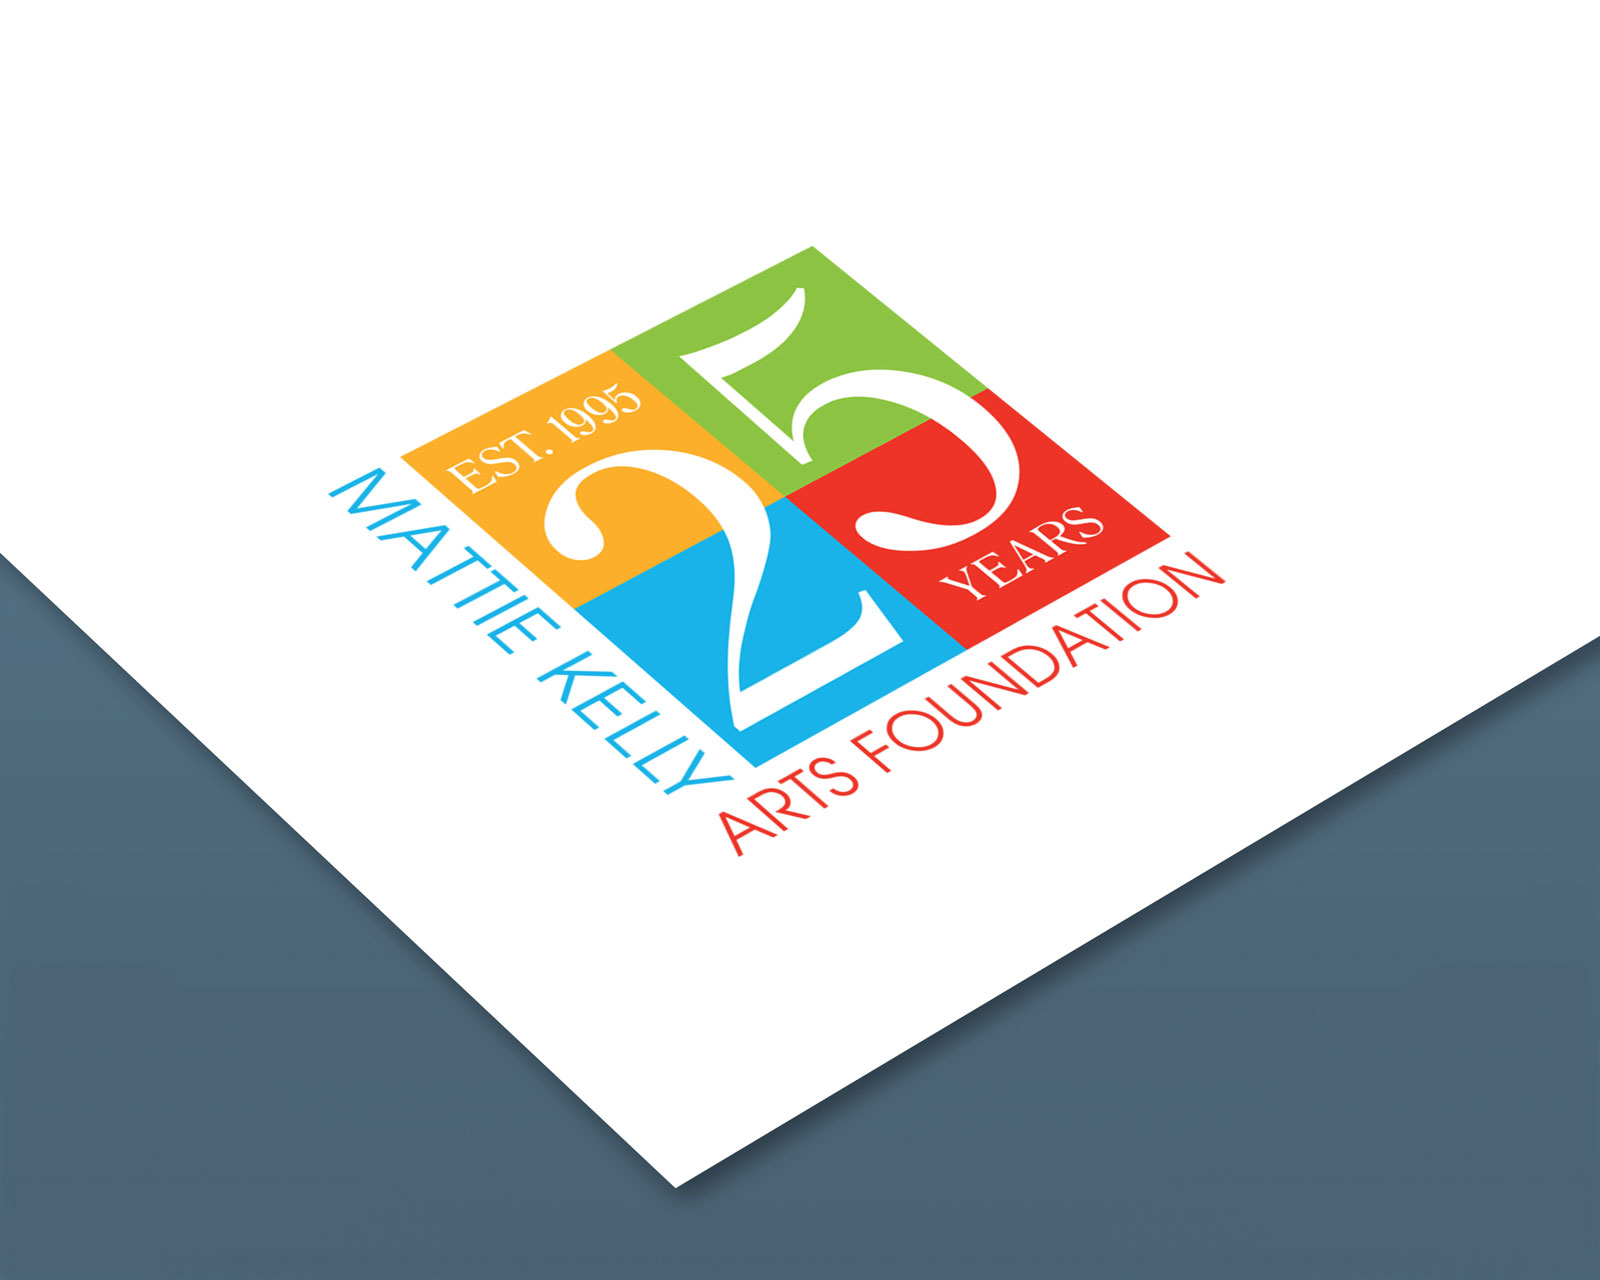 25 year anniversary logo design for local arts and culture community foundation